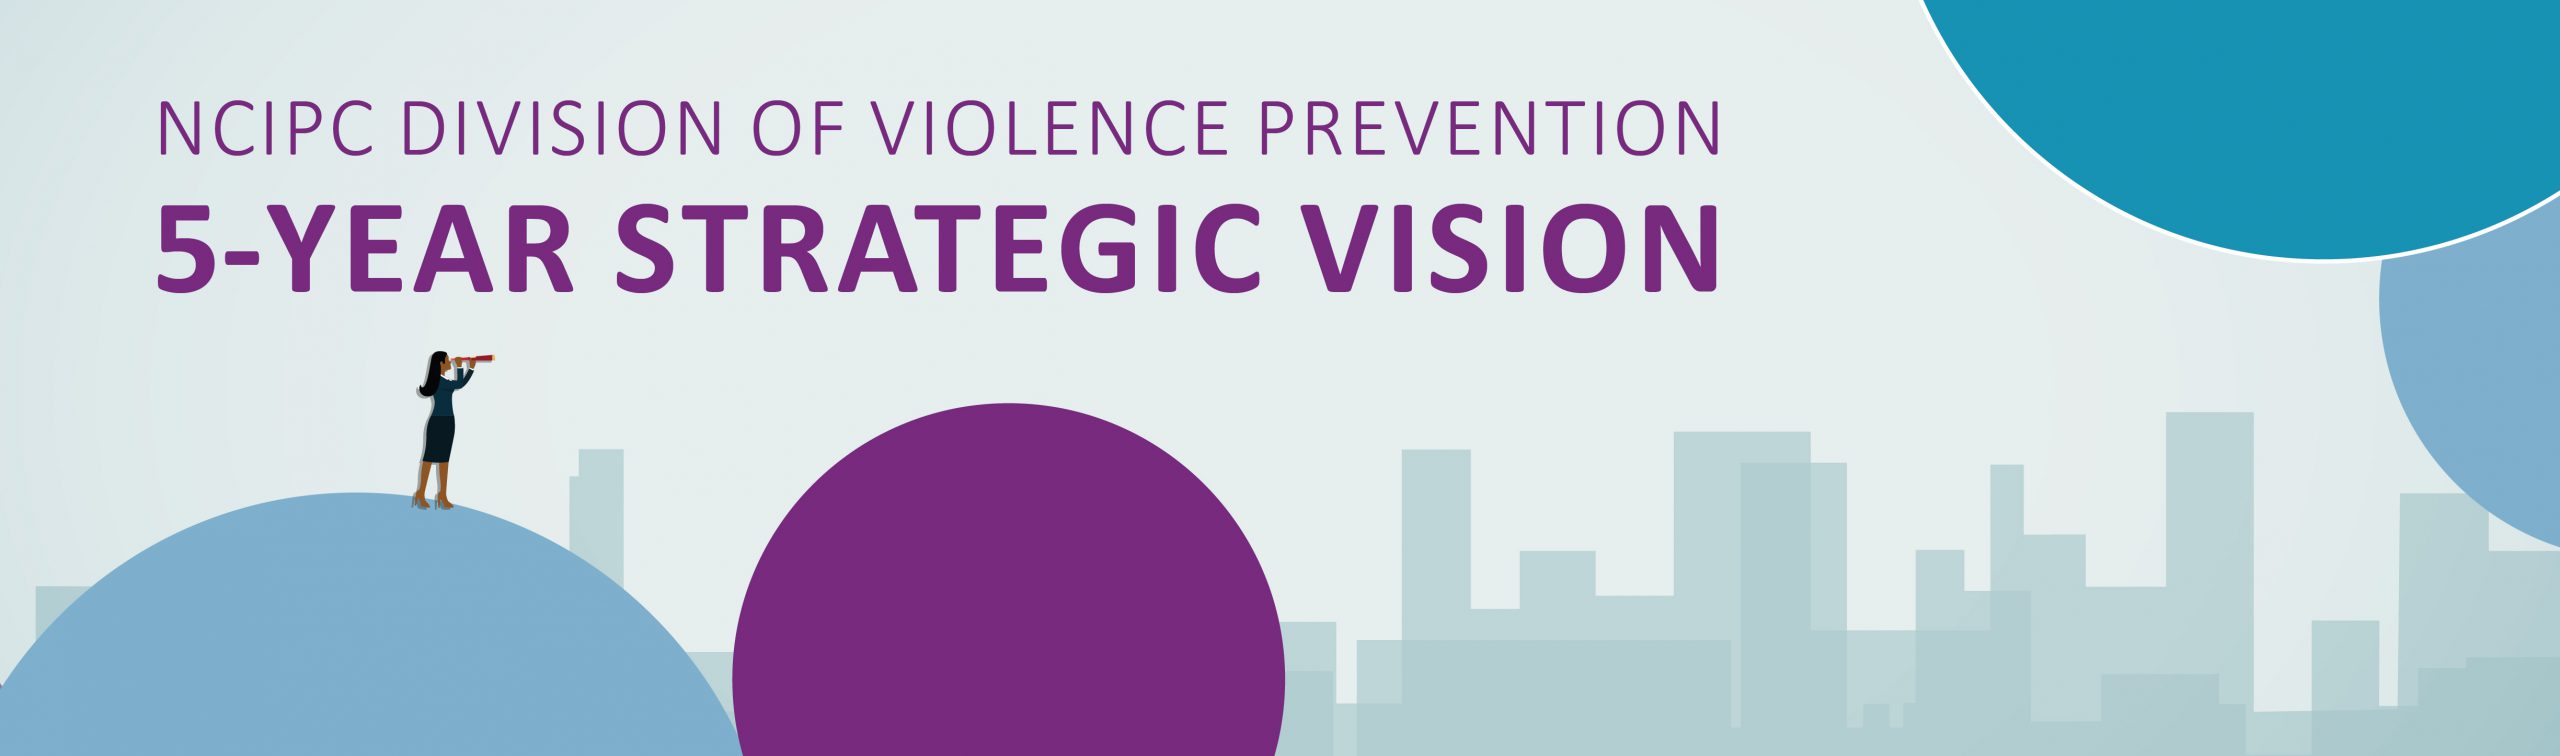 The Division of Violence Prevention’s Strategic Vision